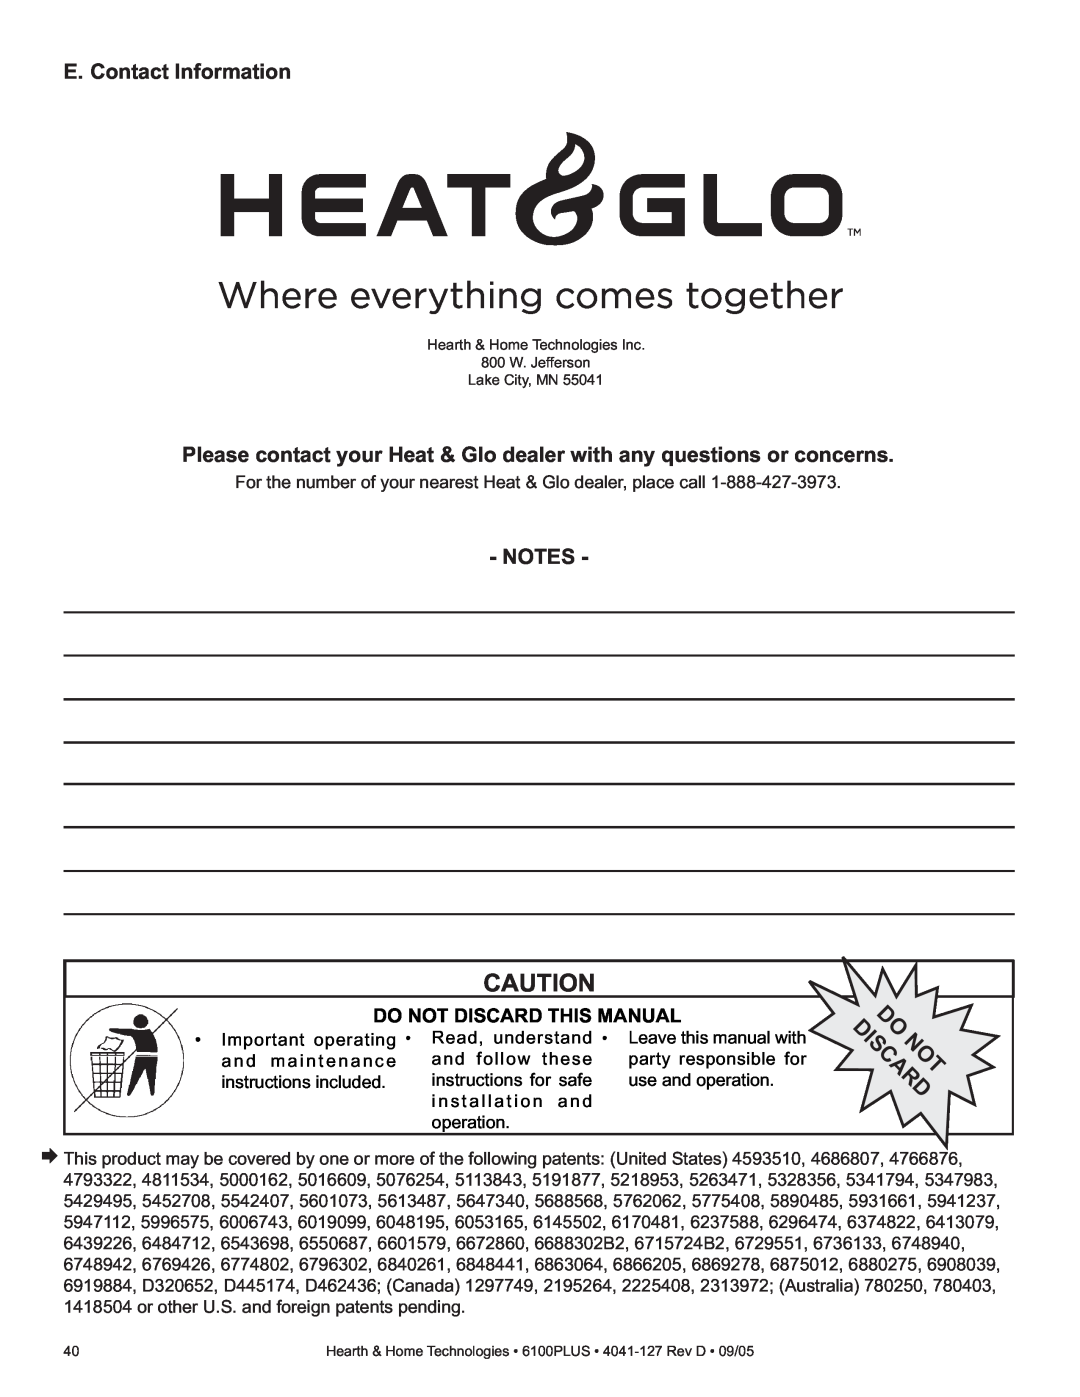 Heat & Glo LifeStyle 6100PLUS owner manual E. Contact Information, Do Not Discard This Manual 